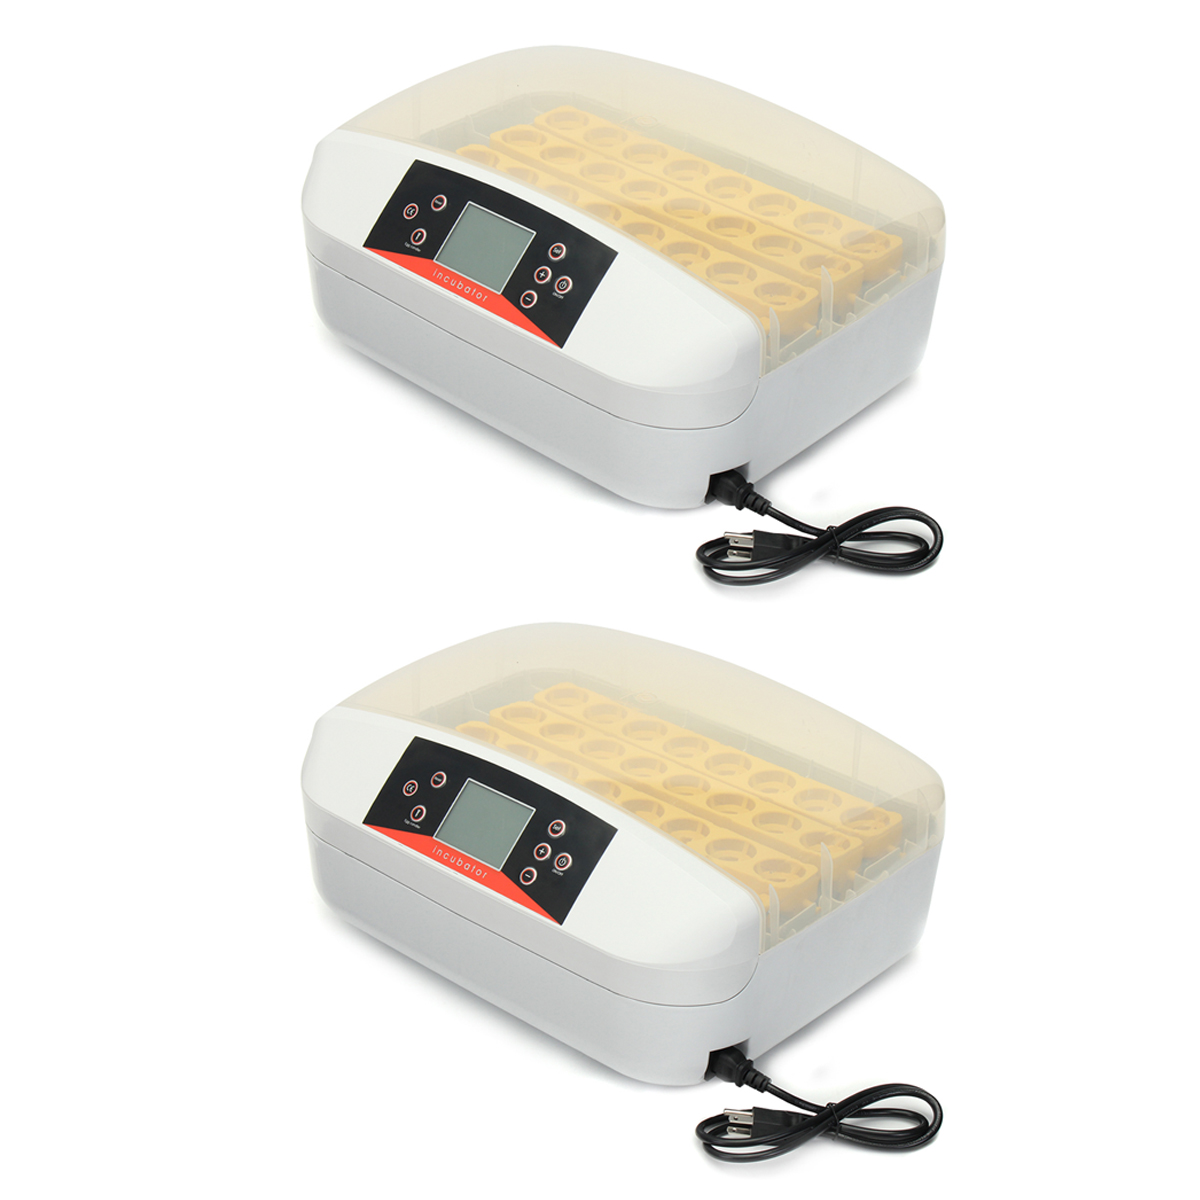 32 Position Electronic Digital Incubator Automatic Hatcher for Poultry Eggs Chicken Egg 31